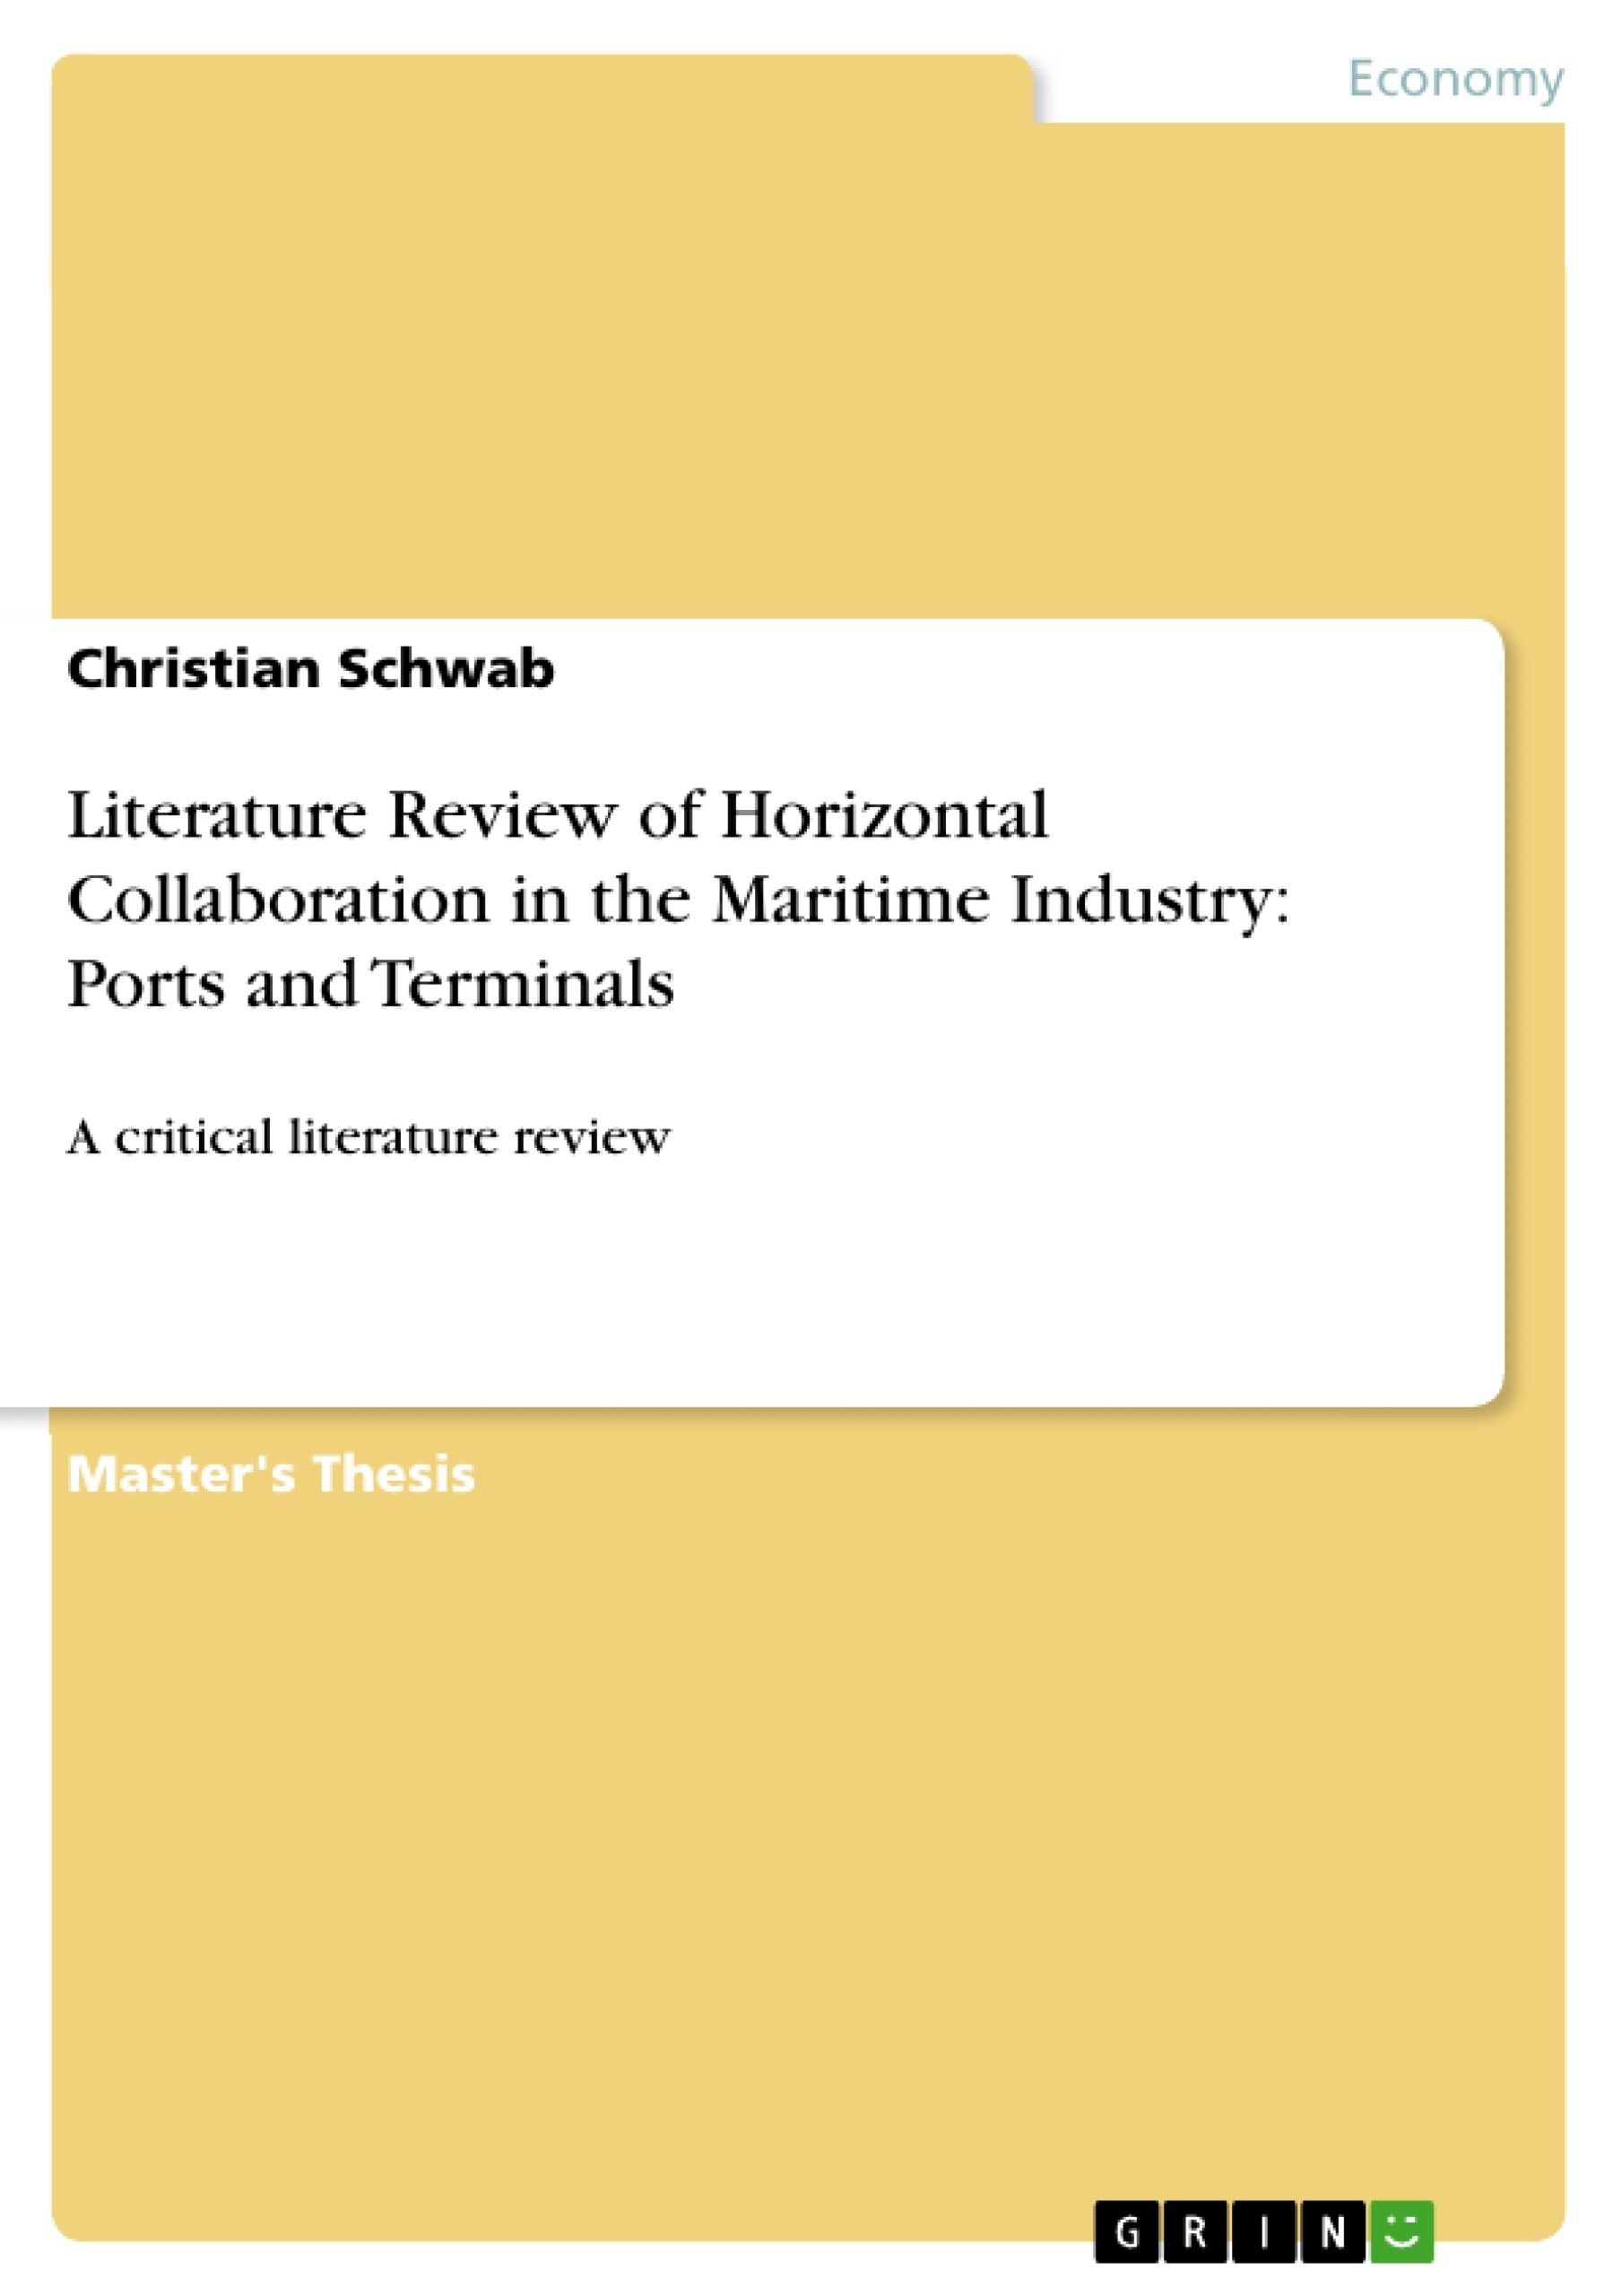 Title: Literature Review of Horizontal Collaboration in the Maritime Industry: Ports and Terminals